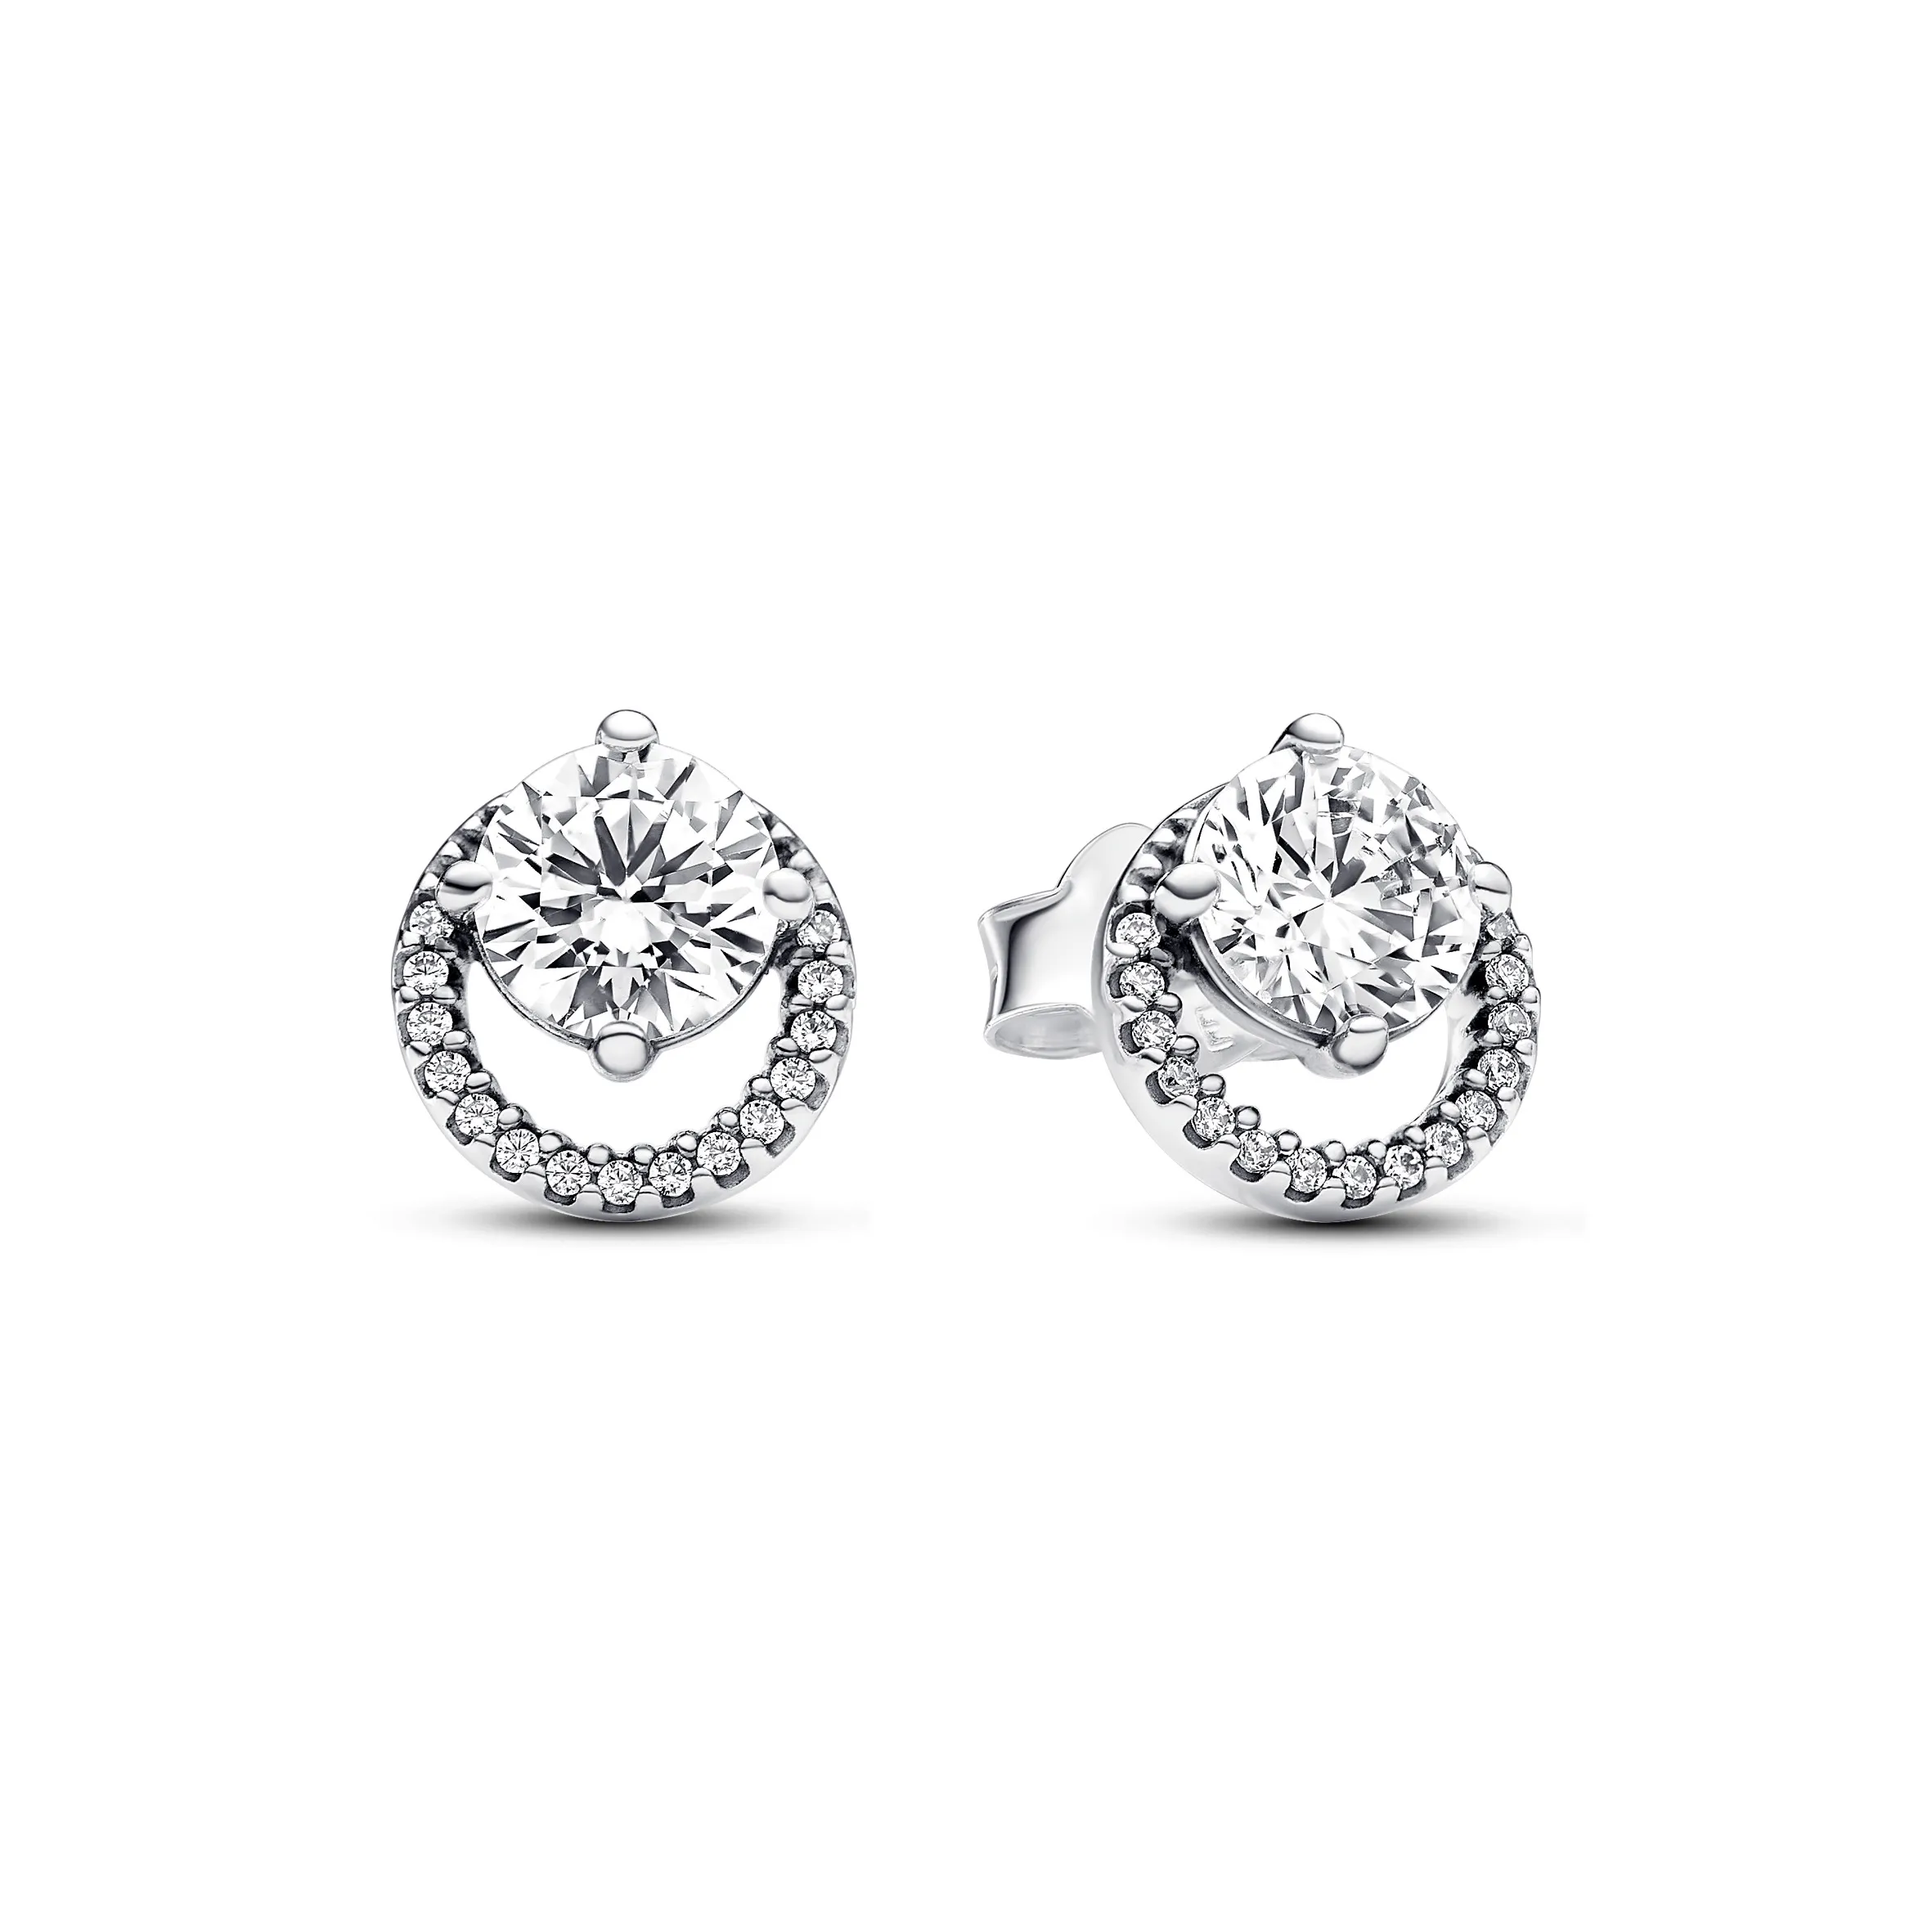 PANDORA Sterling silver stud earrings with clear cubic zirconia